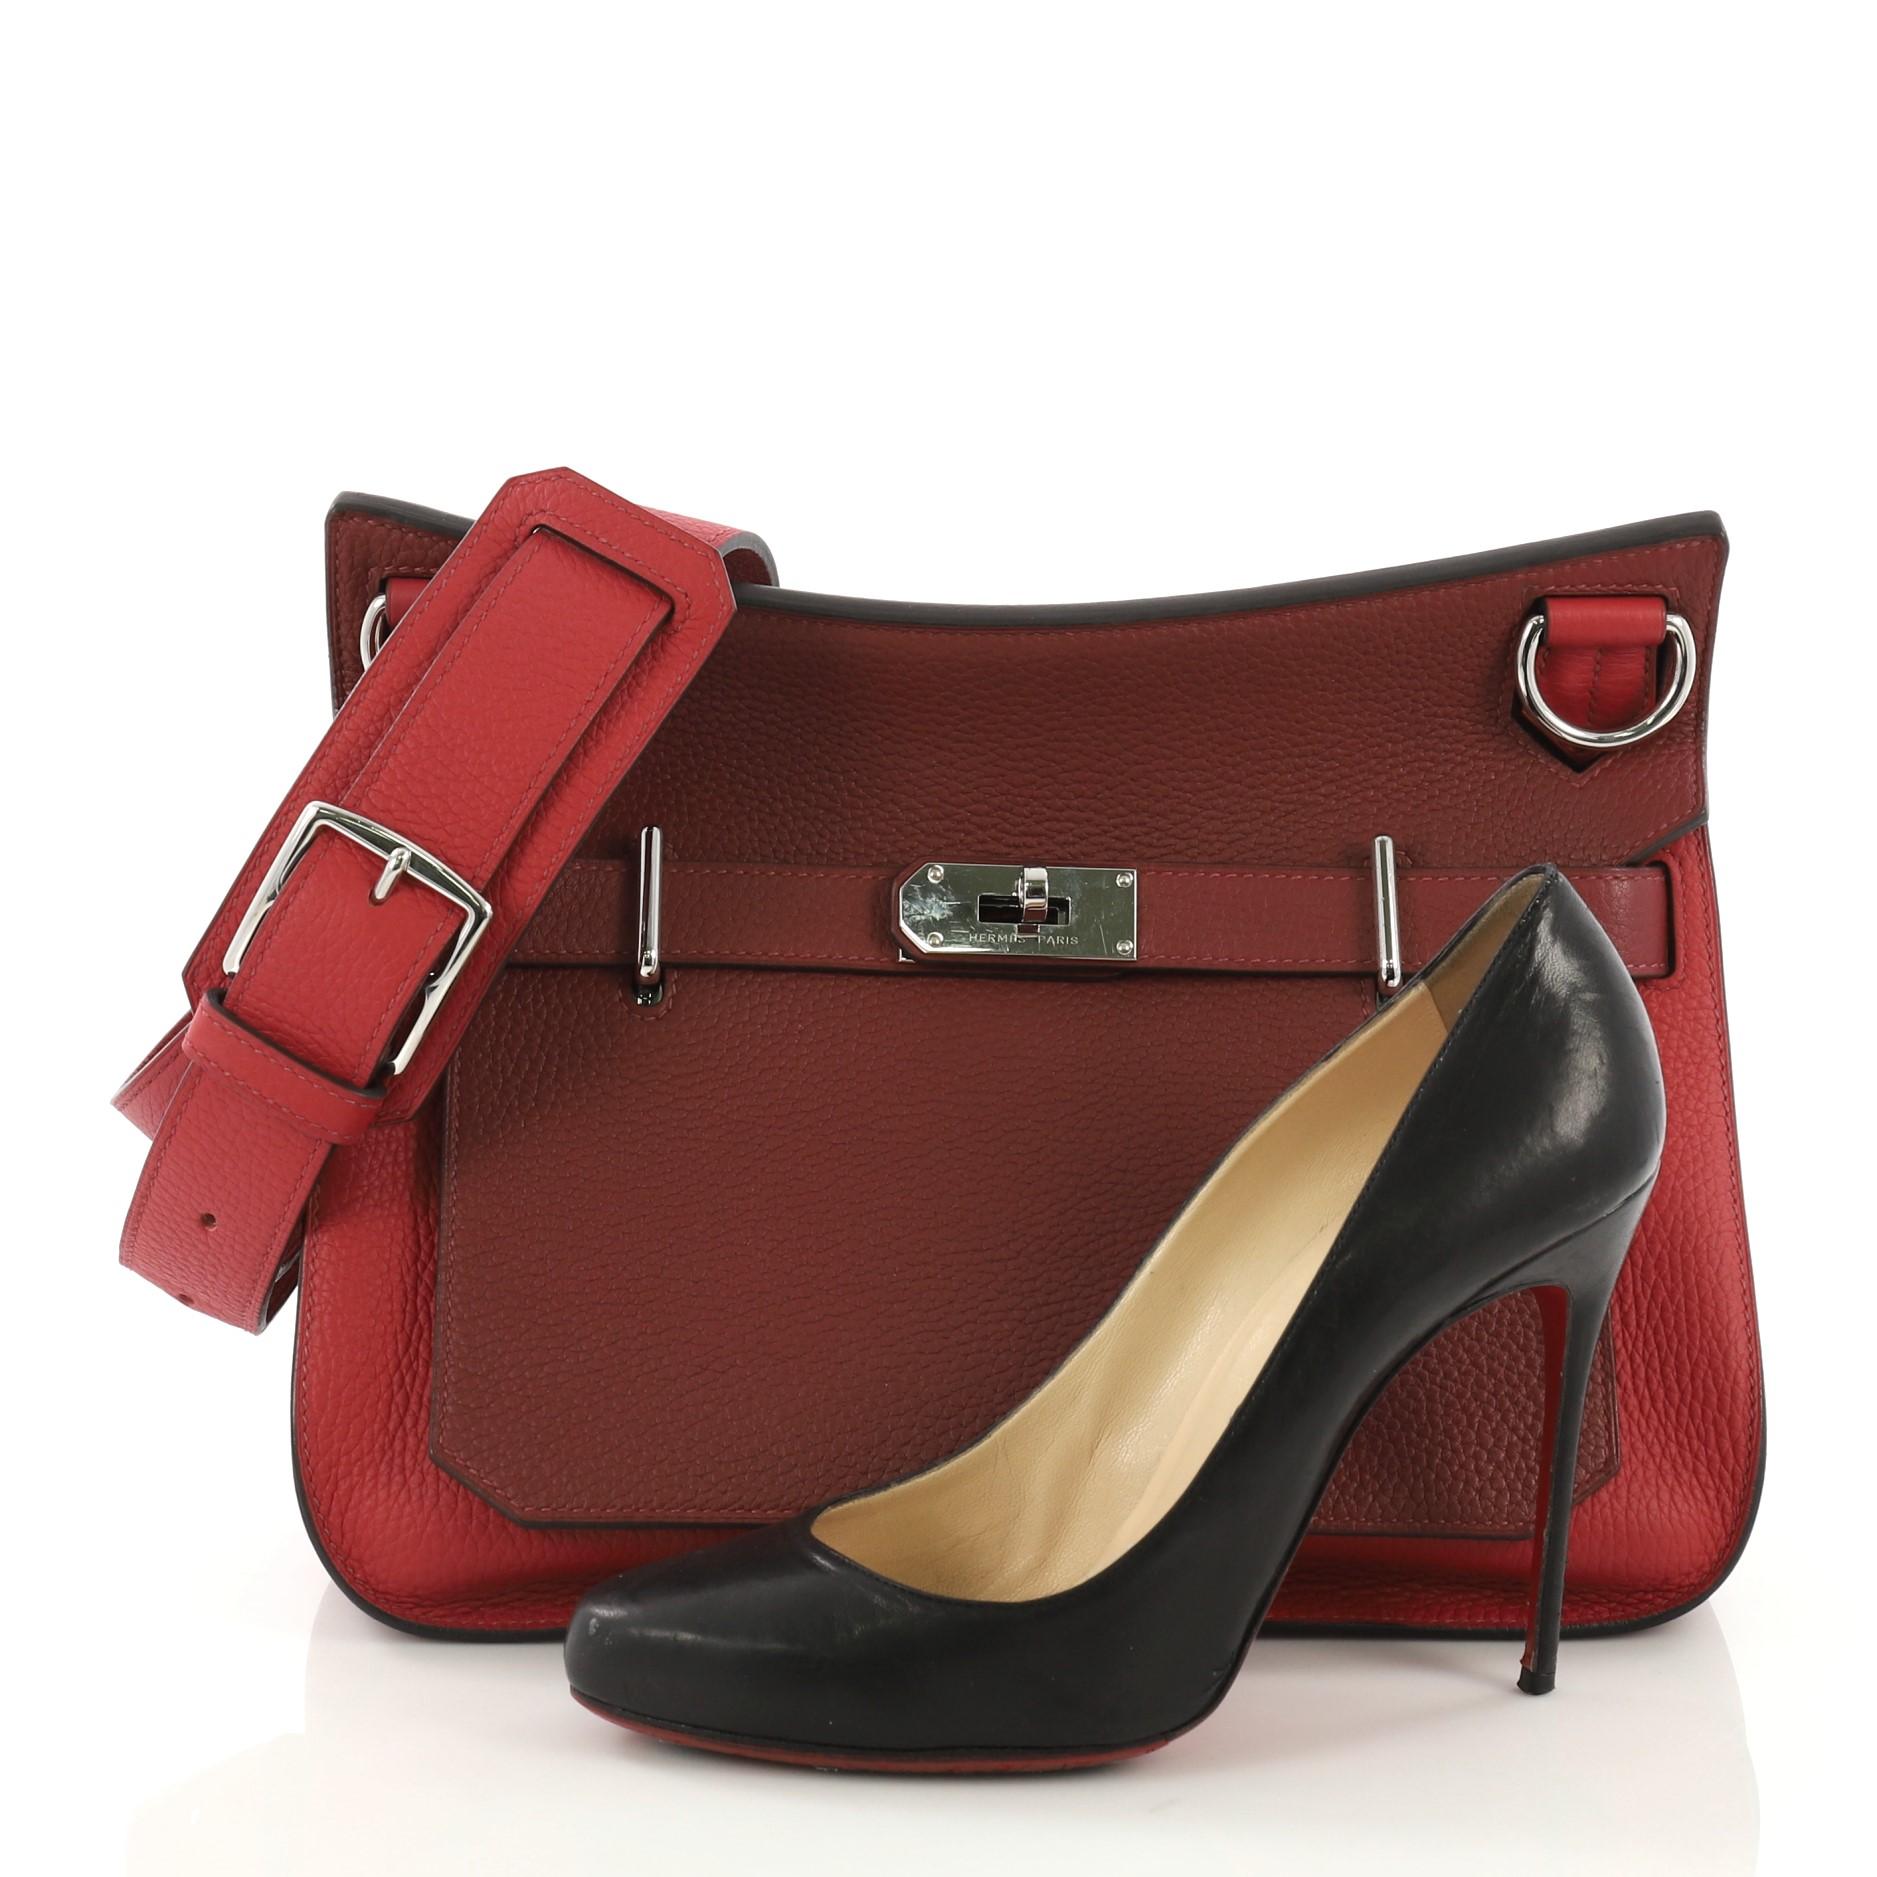 This Hermes Jypsiere 31, crafted in Rouge H and Rouge Casaque red Clemence leather, features a long adjustable strap and palladium hardware. Its front flap with the iconic Hermes turn-lock clasp closure opens to a Rouge H red chevre leather interior